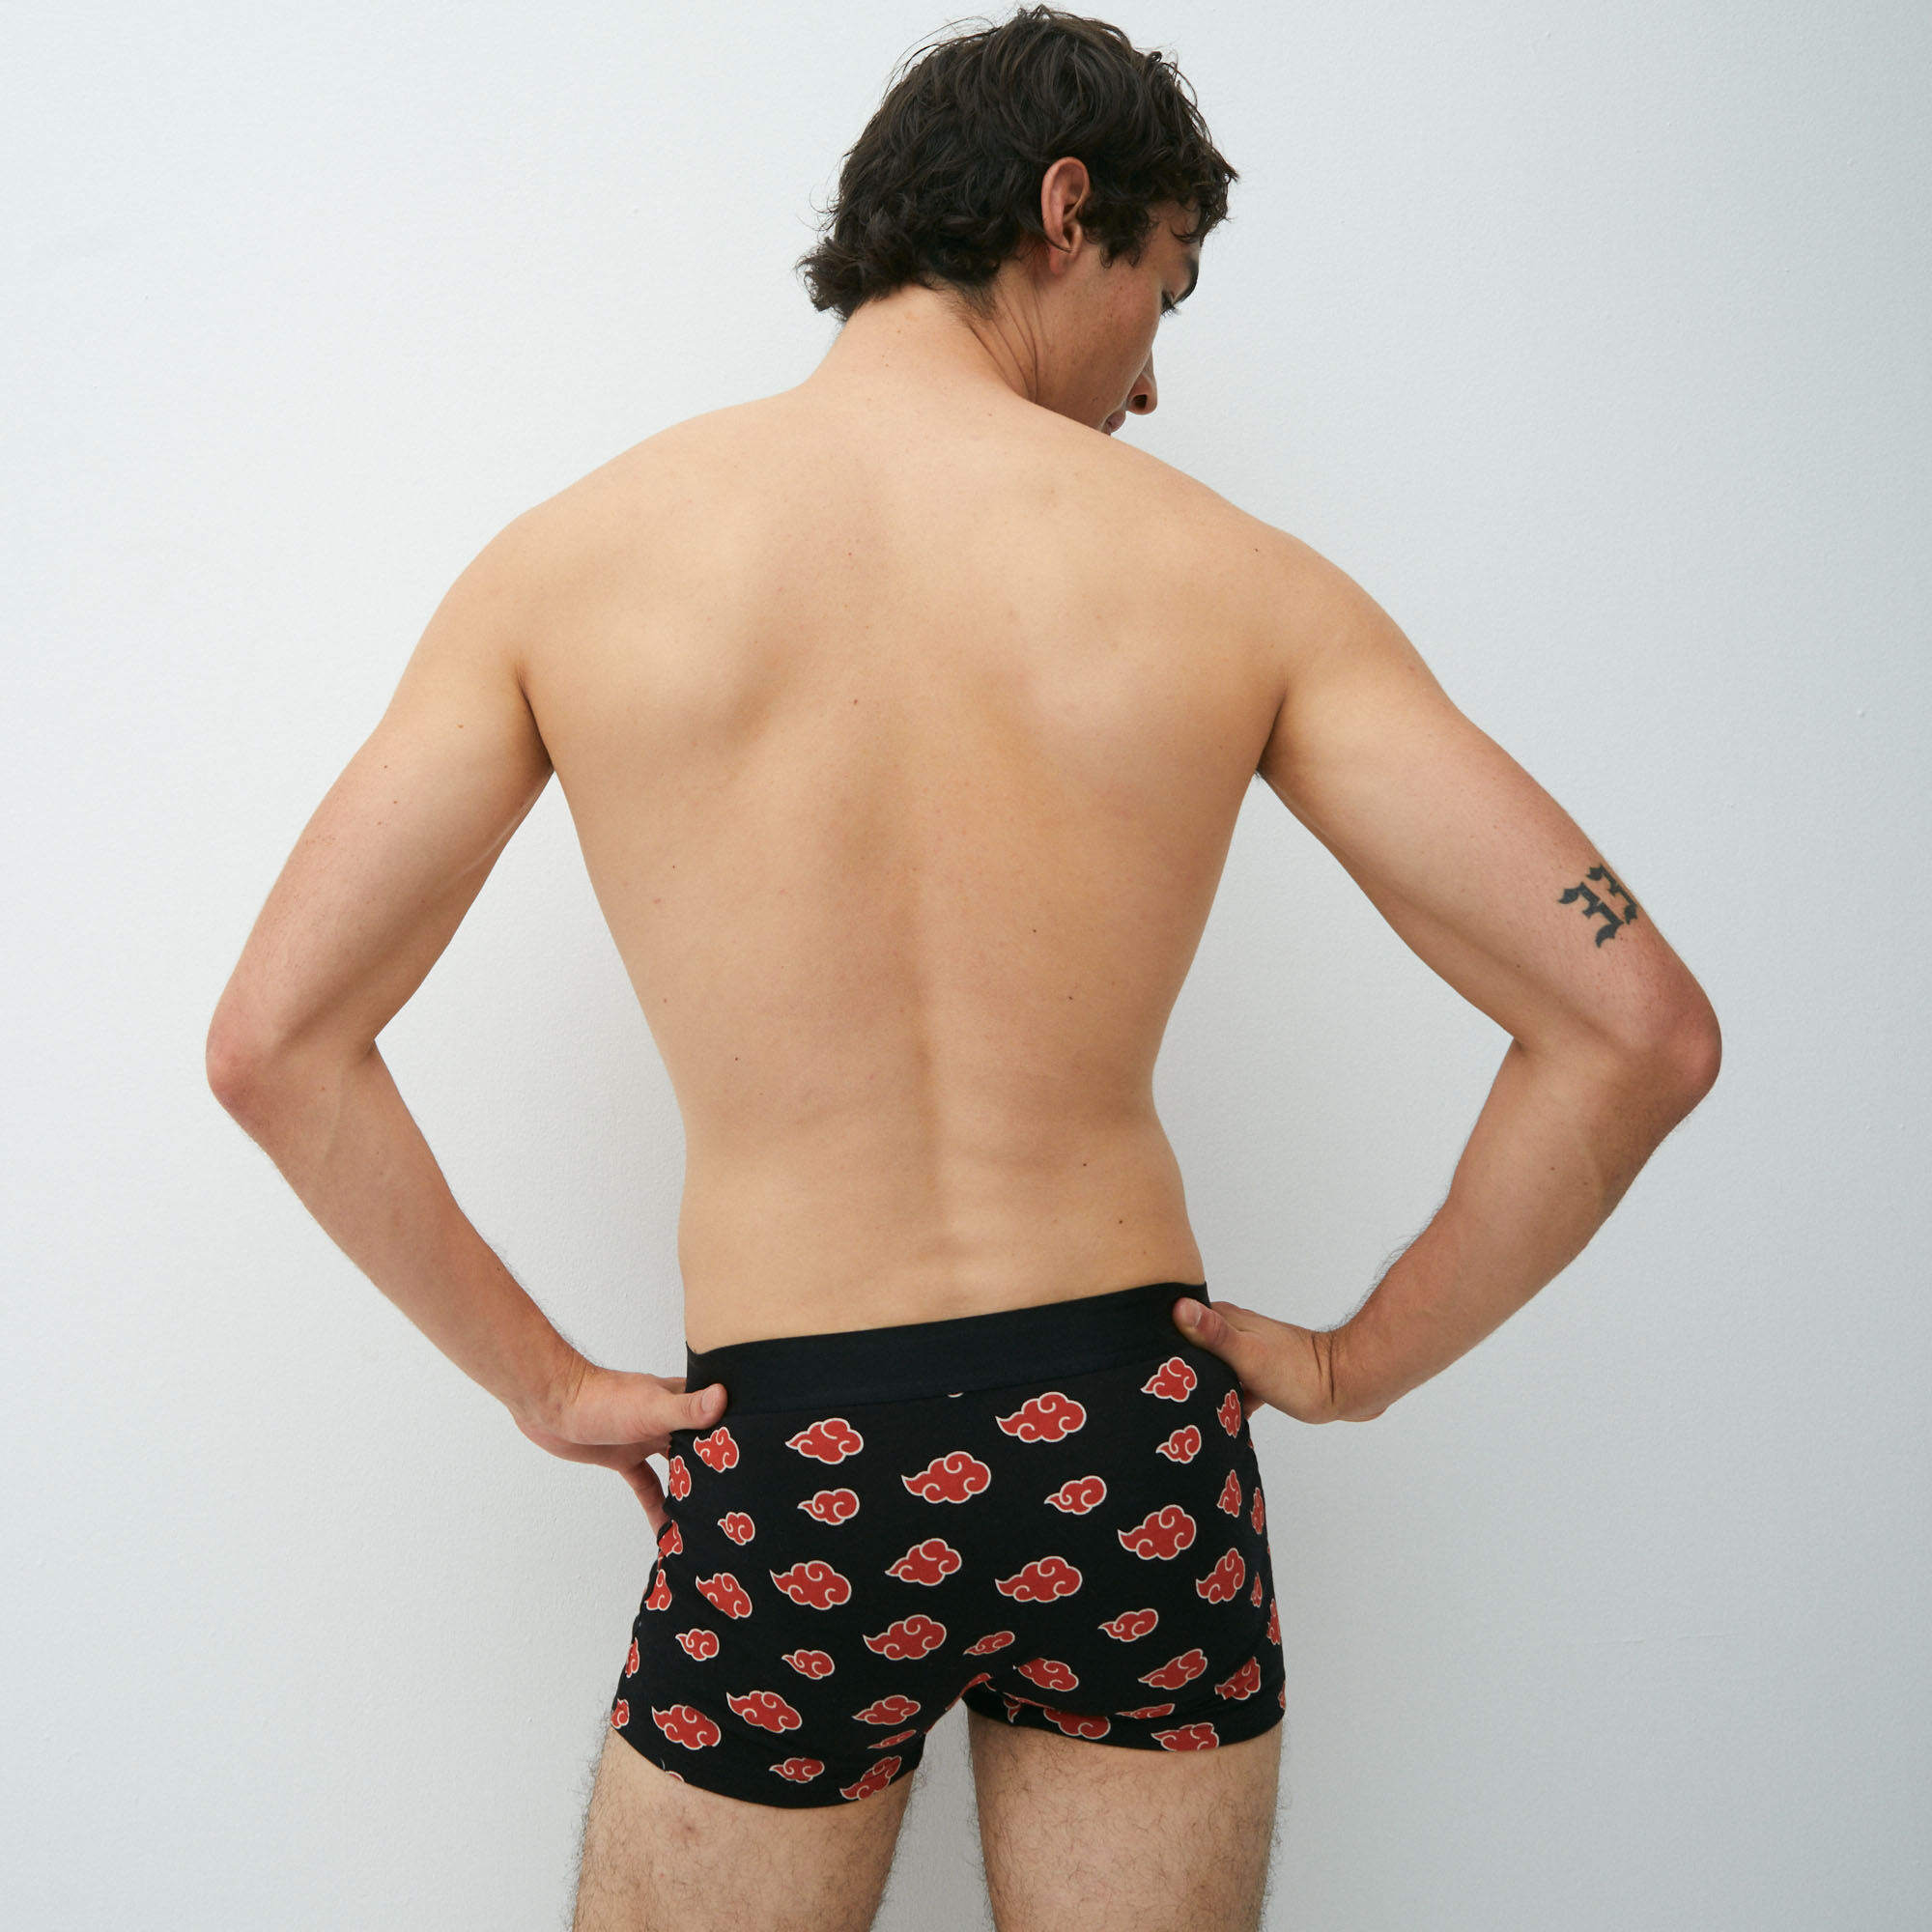 PSD x Playboy Cyber Bunnies Boxer Briefs | Vancouver Mall